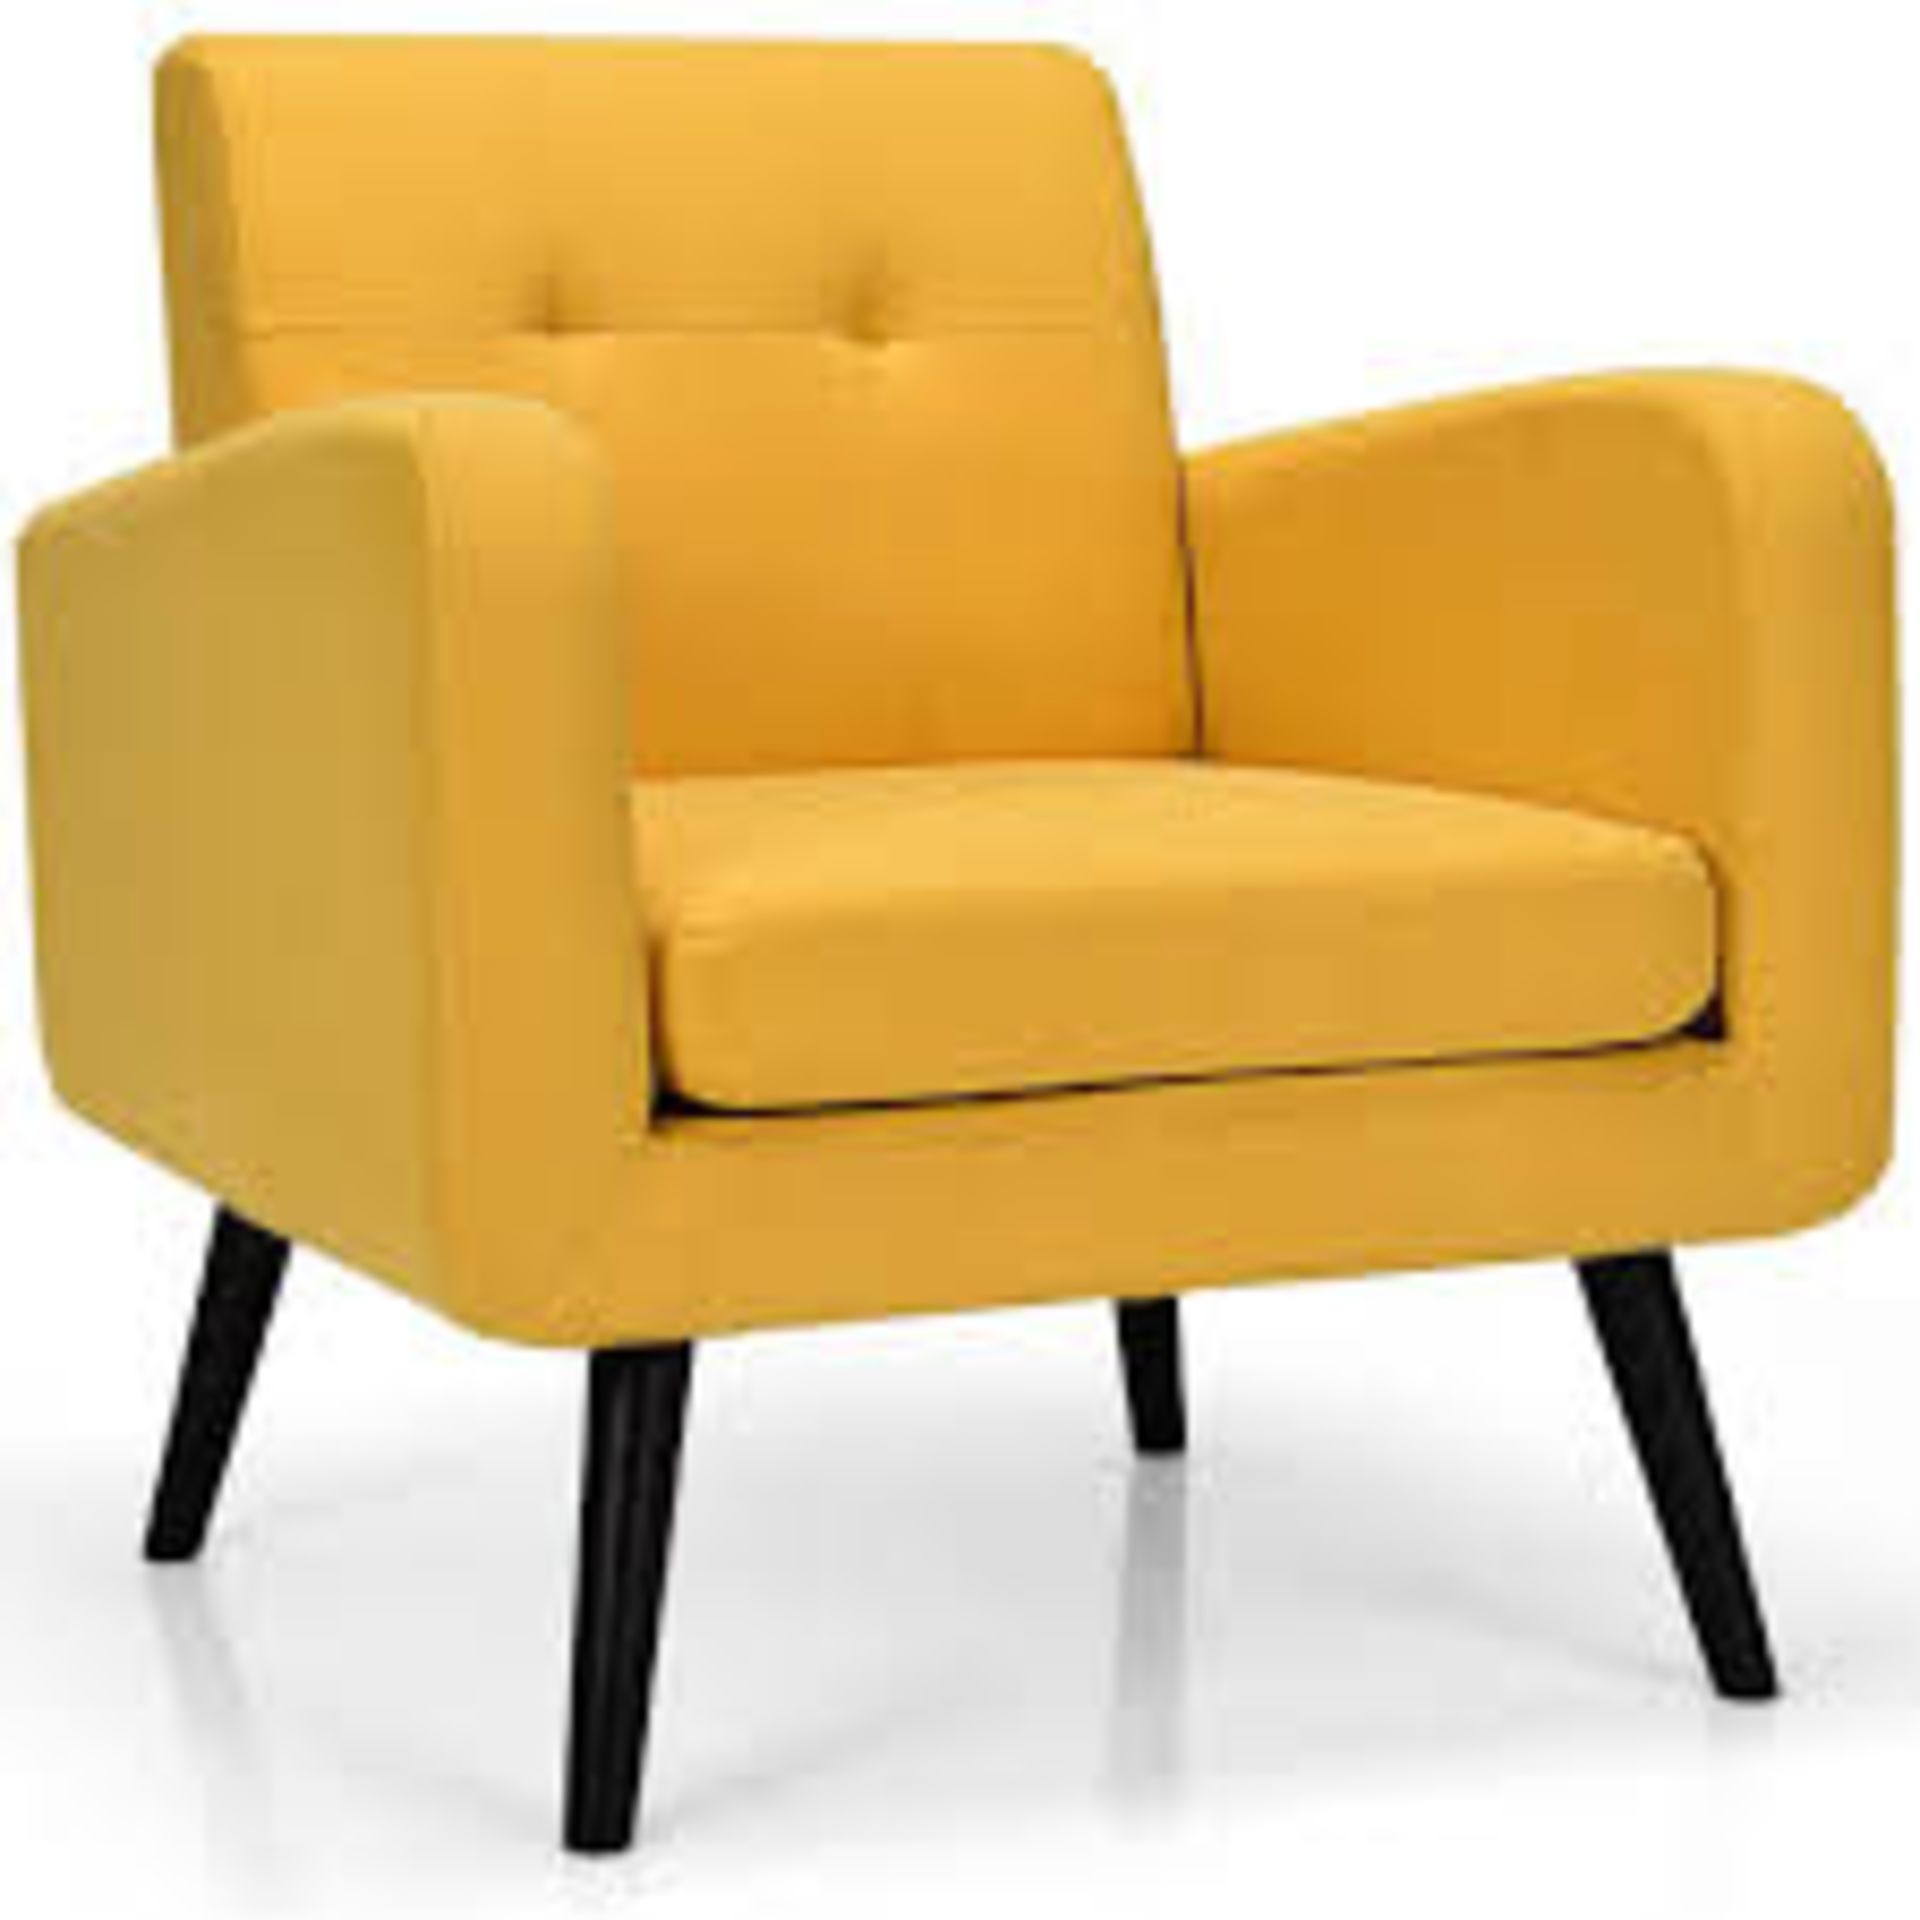 Costway Yellow Rubber Wood Arm Chair .- R14.3. Would you like to have a more comfortable rest in a